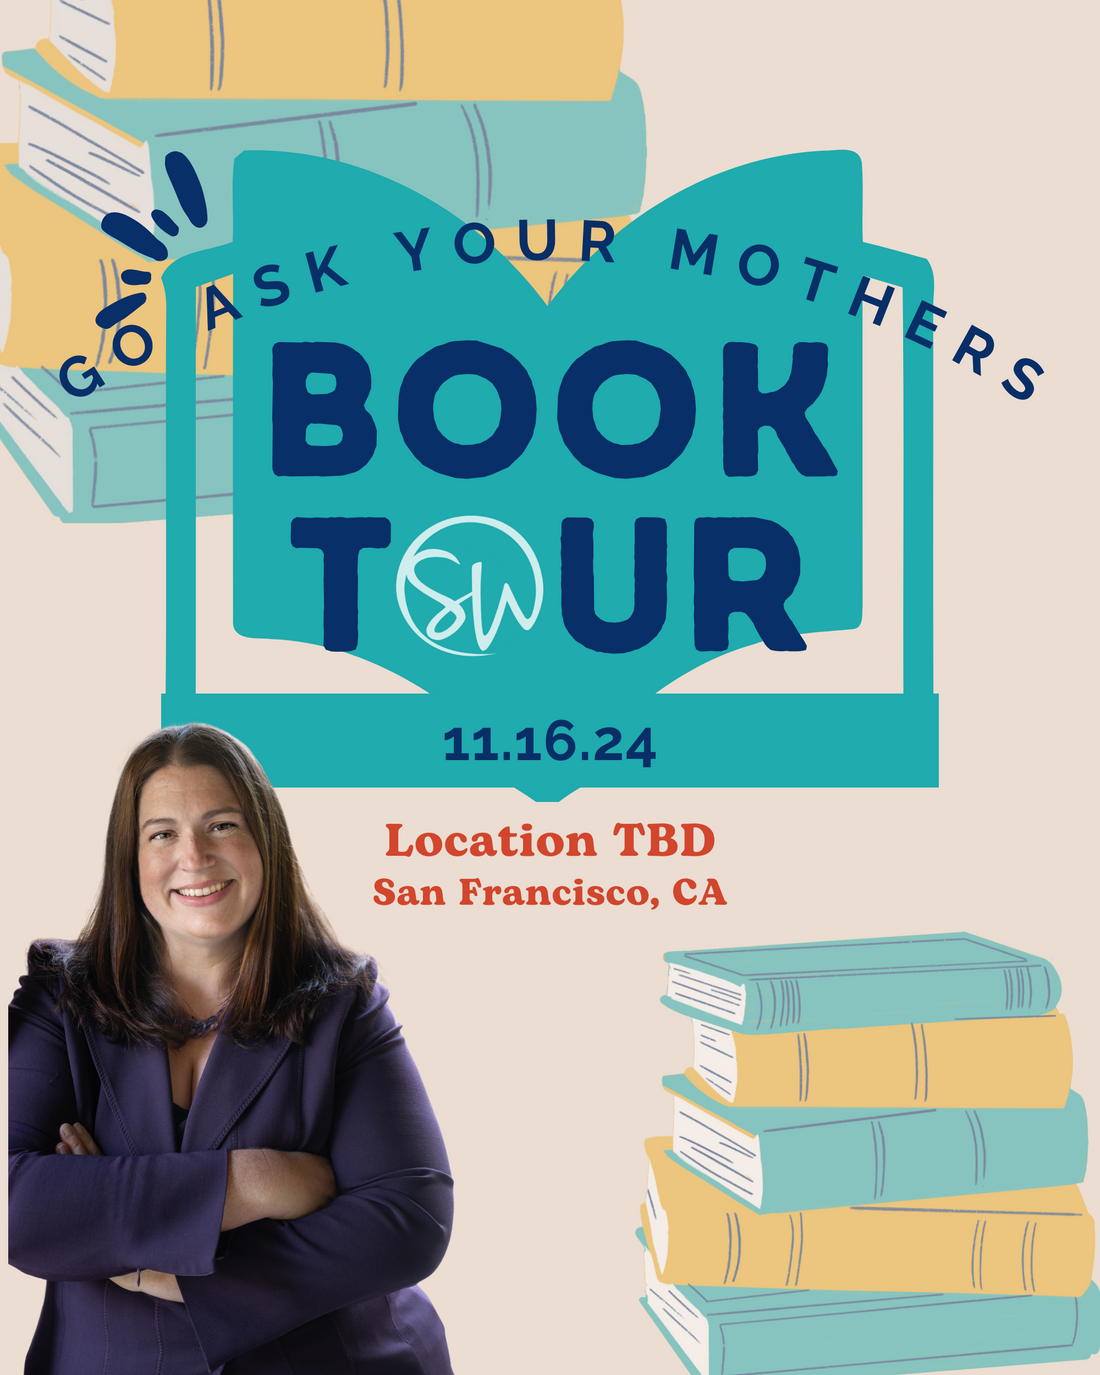 Go Ask Your Mothers w/Sarah Wells - Book Tour 2024 - San Francisco, CA - FREE Ticket